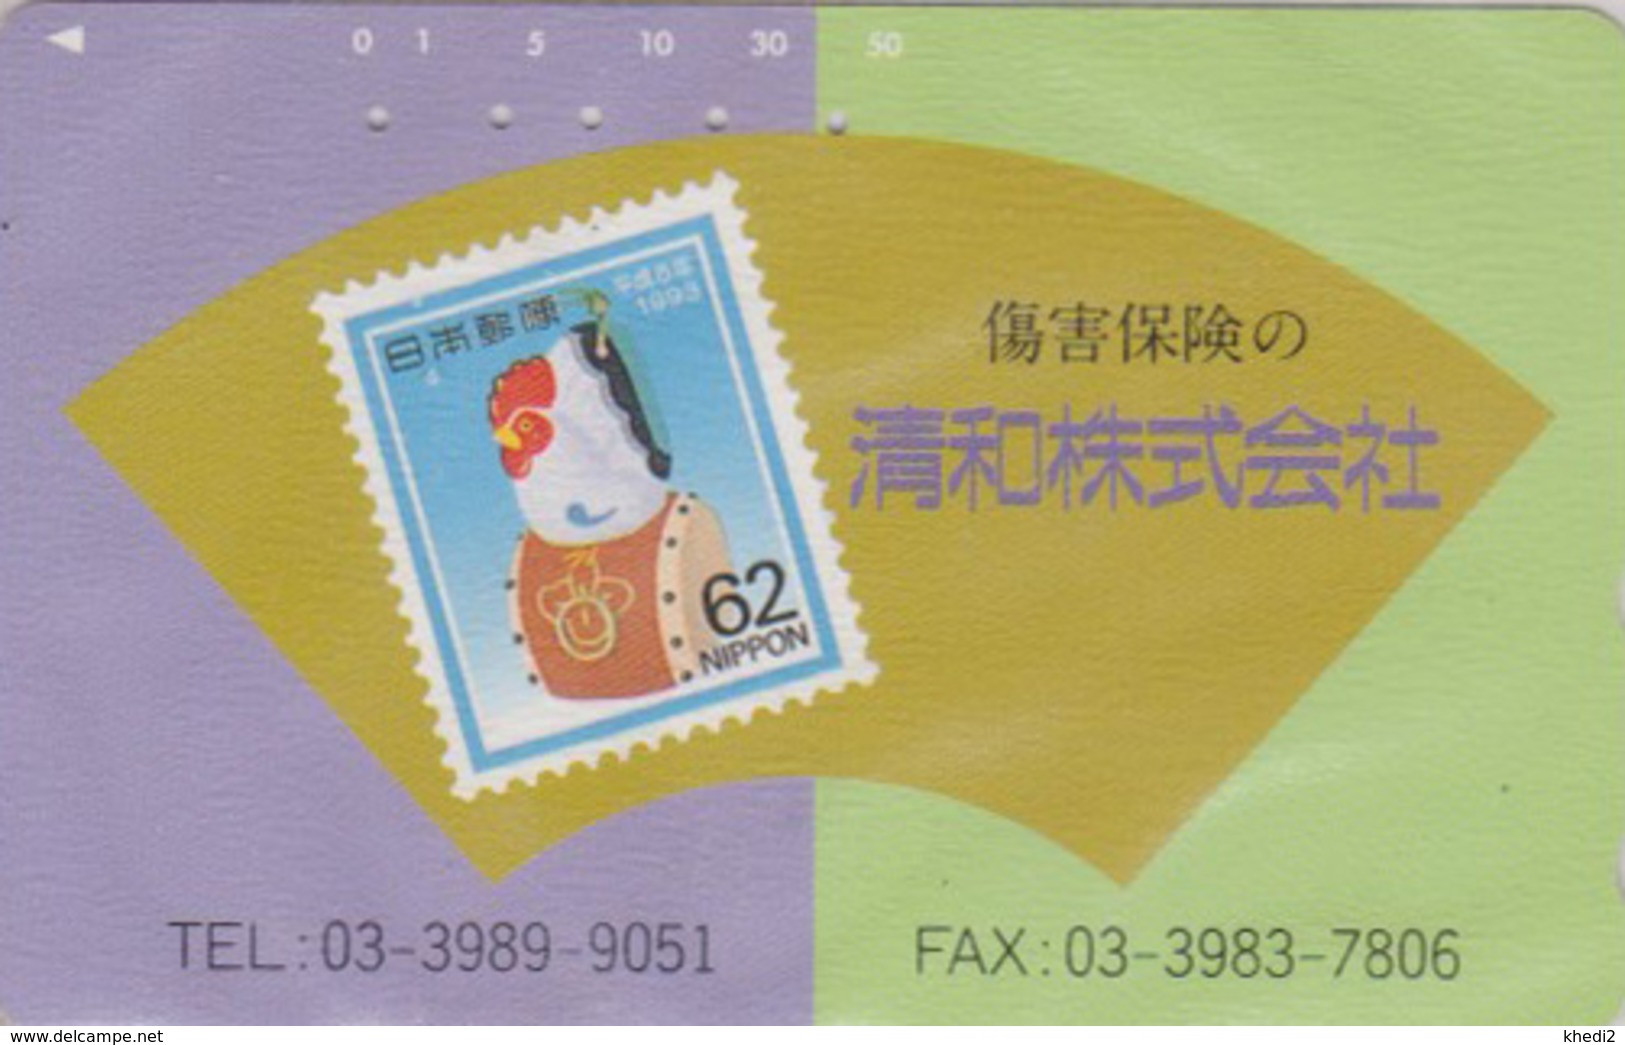 TC JAPON / 110-140314 - ZODIAQUE - COQ Sur TIMBRE - YEAR OF THE COCK Horoscope On STAMP JAPAN Free Phonecard - 160 - Sellos & Monedas